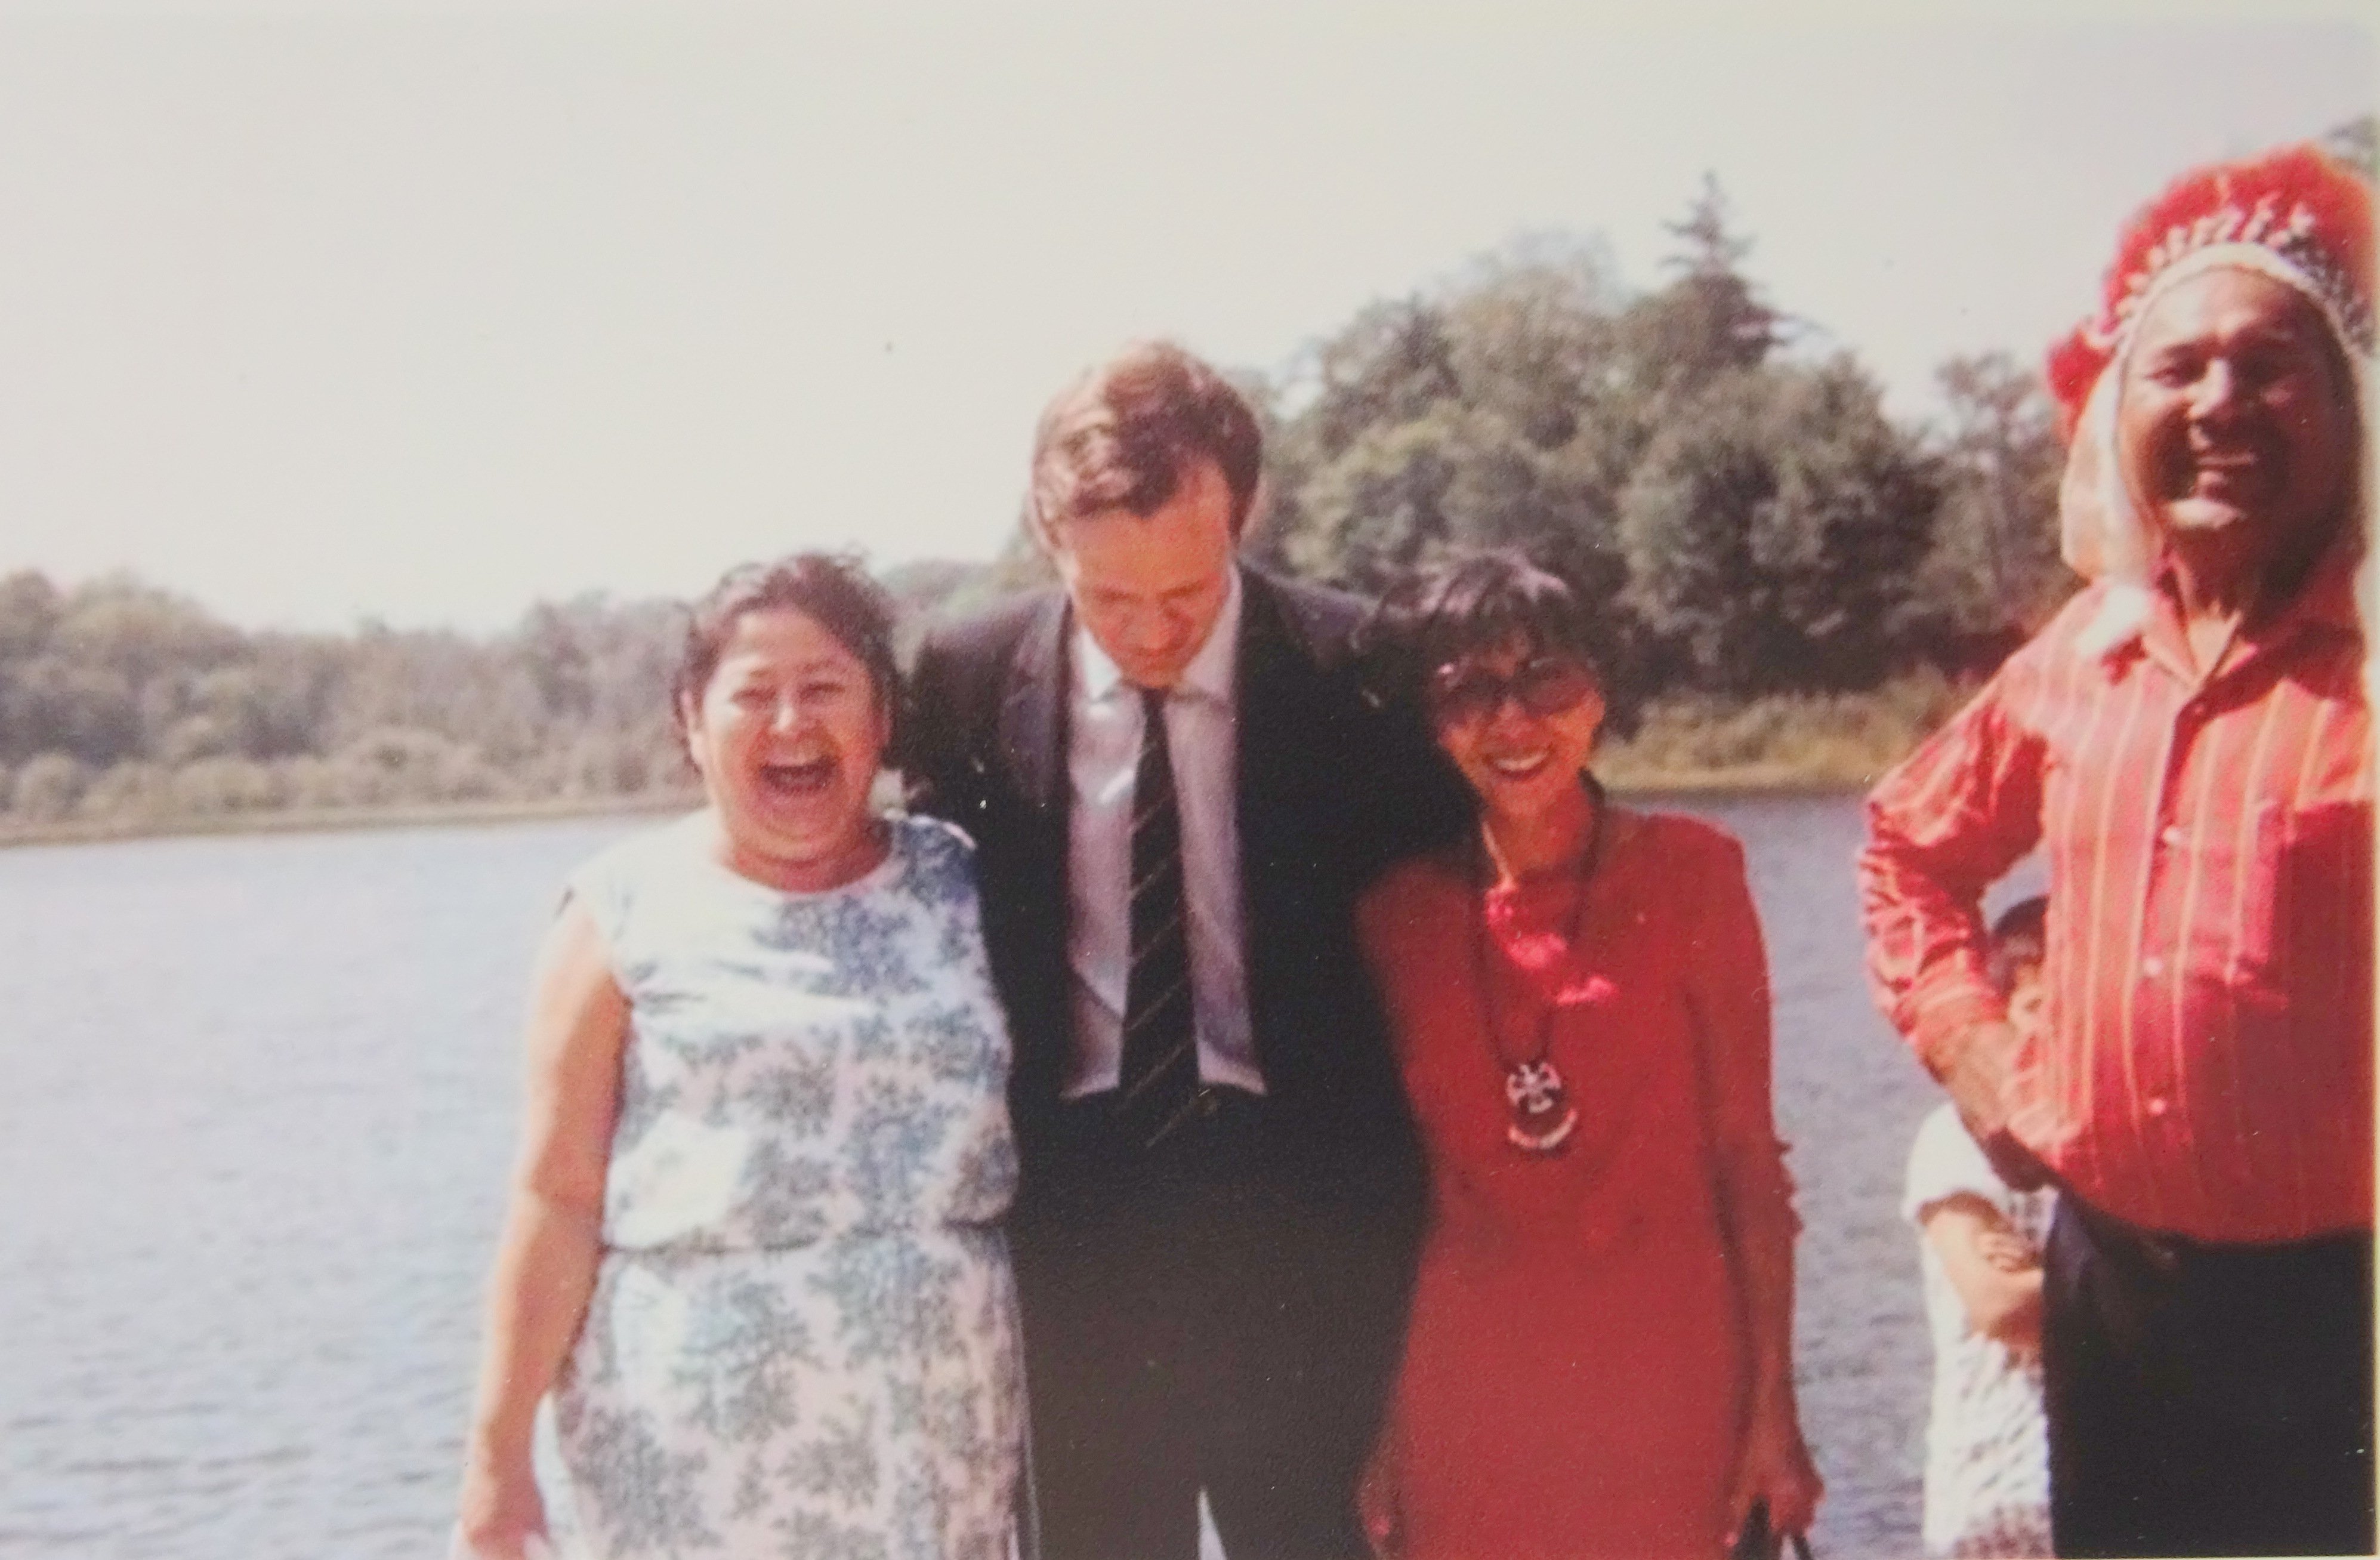 Hettie Sylvester, Jean Chretien (Minister of Indian Affairs and Northern Development), Irene and Chief of Christian Island, circa 1969. Photo taken by Mildred Redmond